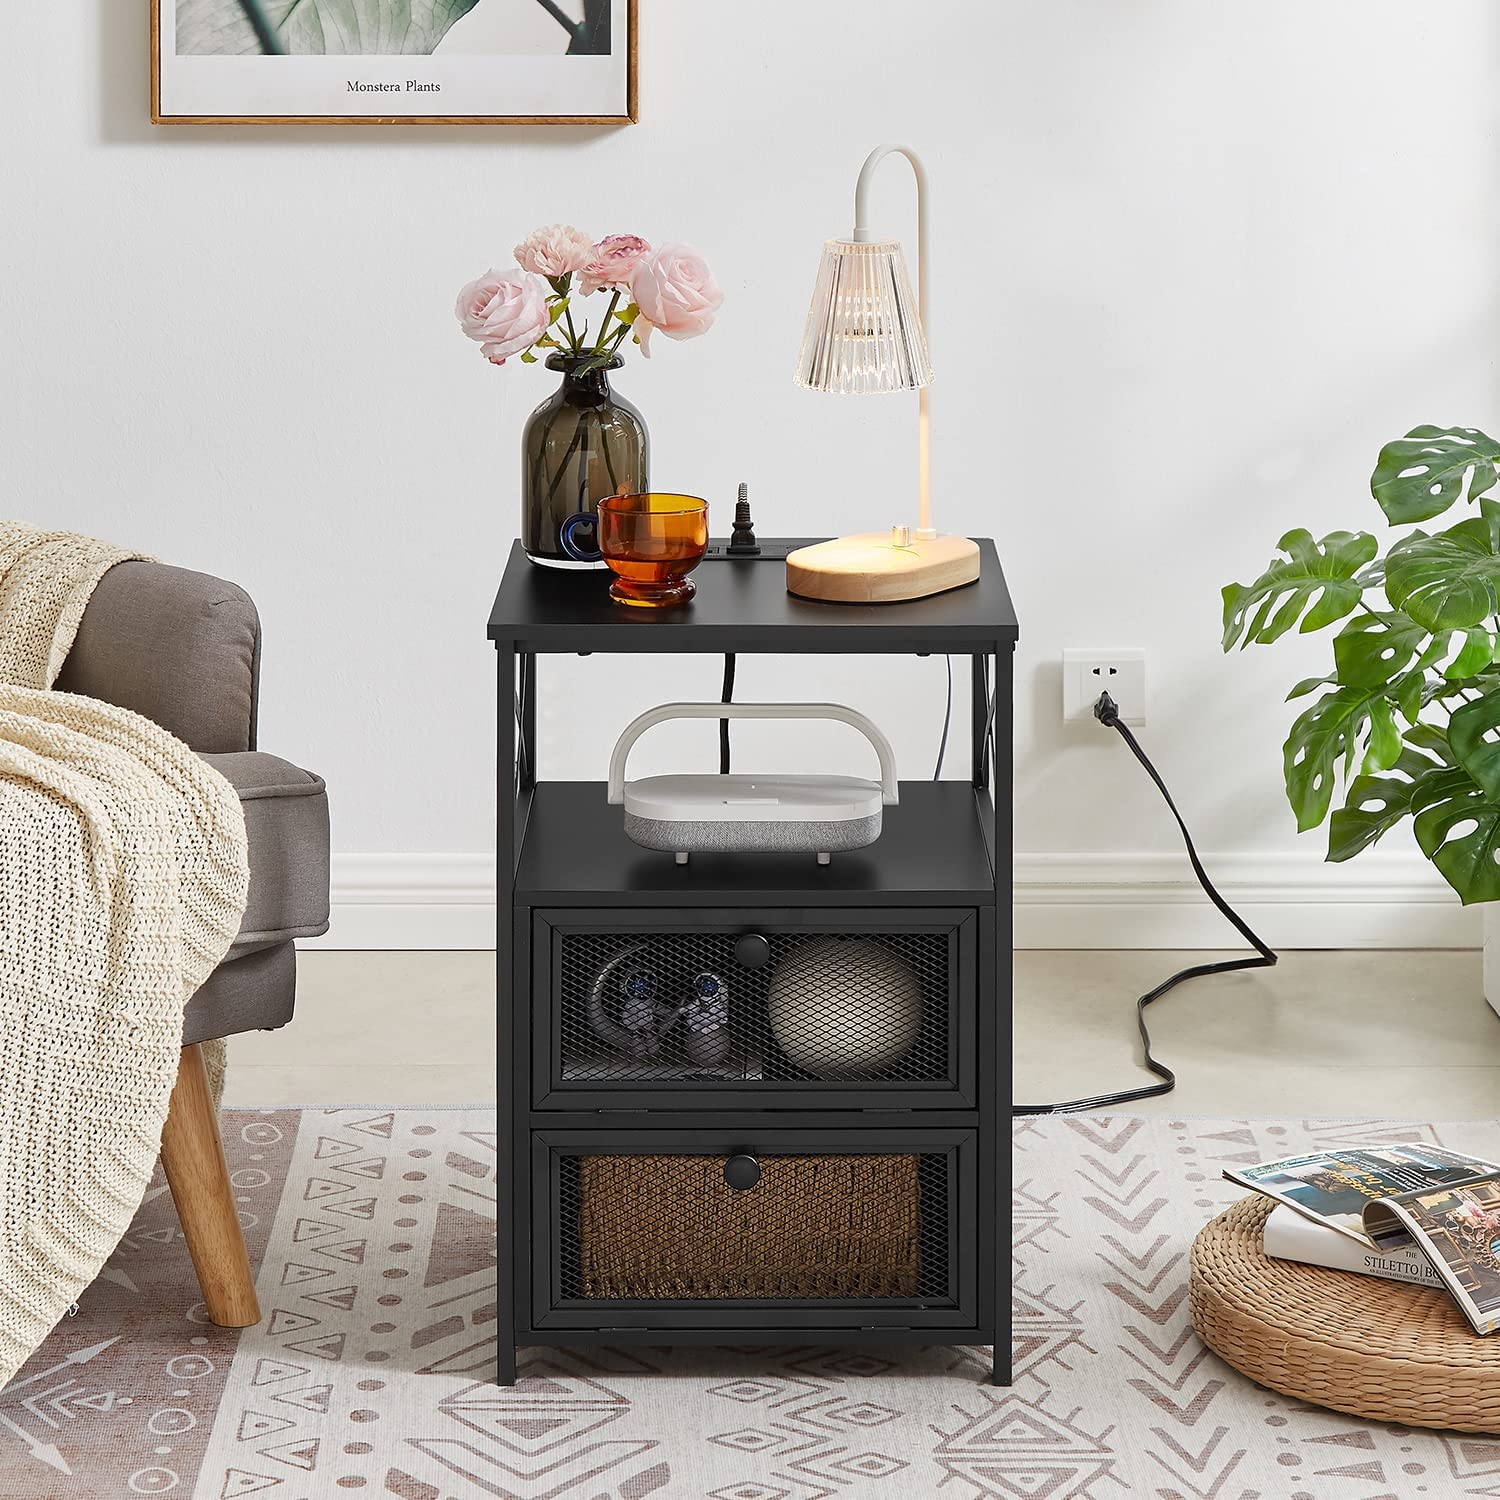 End Side Tables with Charging Station,2 Flip Drawers and USB Ports & Power Outlets